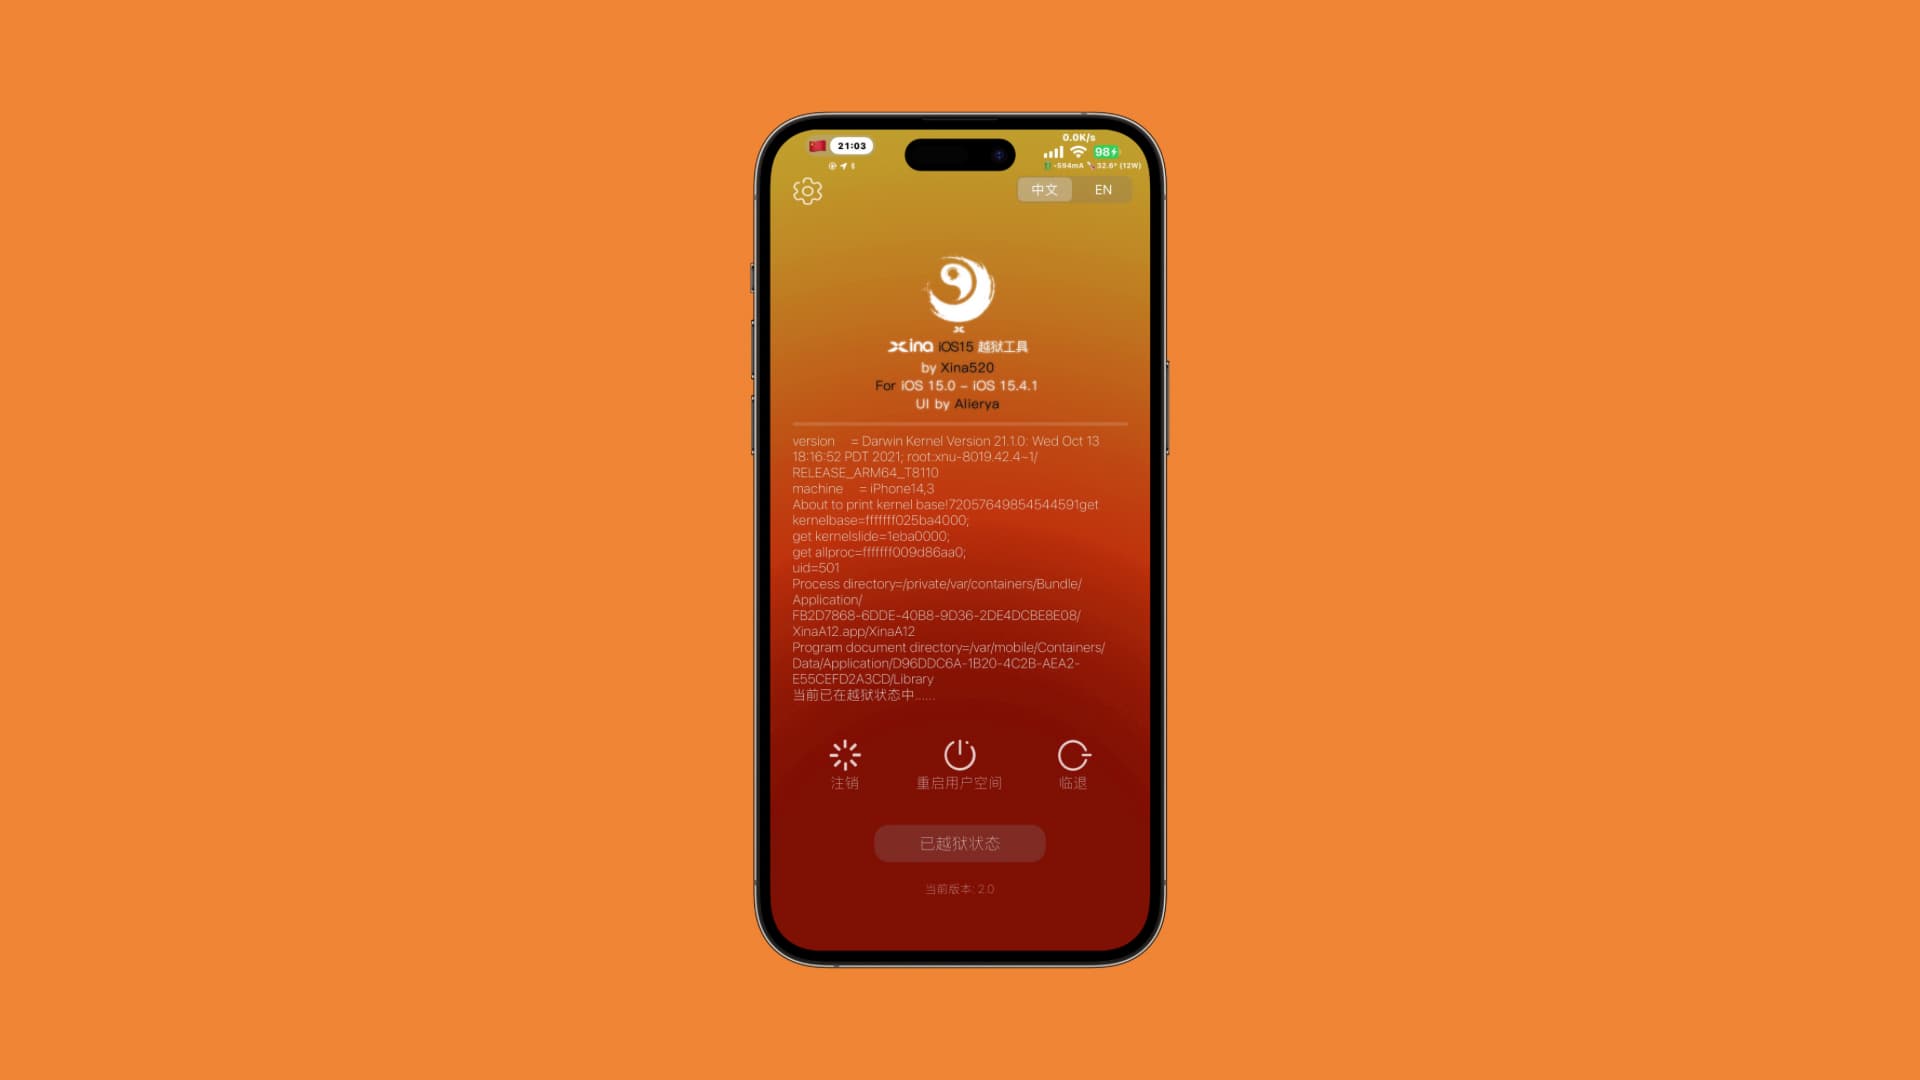 XinaA15 v2 jailbreak launches with true rootless tweak support for iOS 15.0-15.4.1